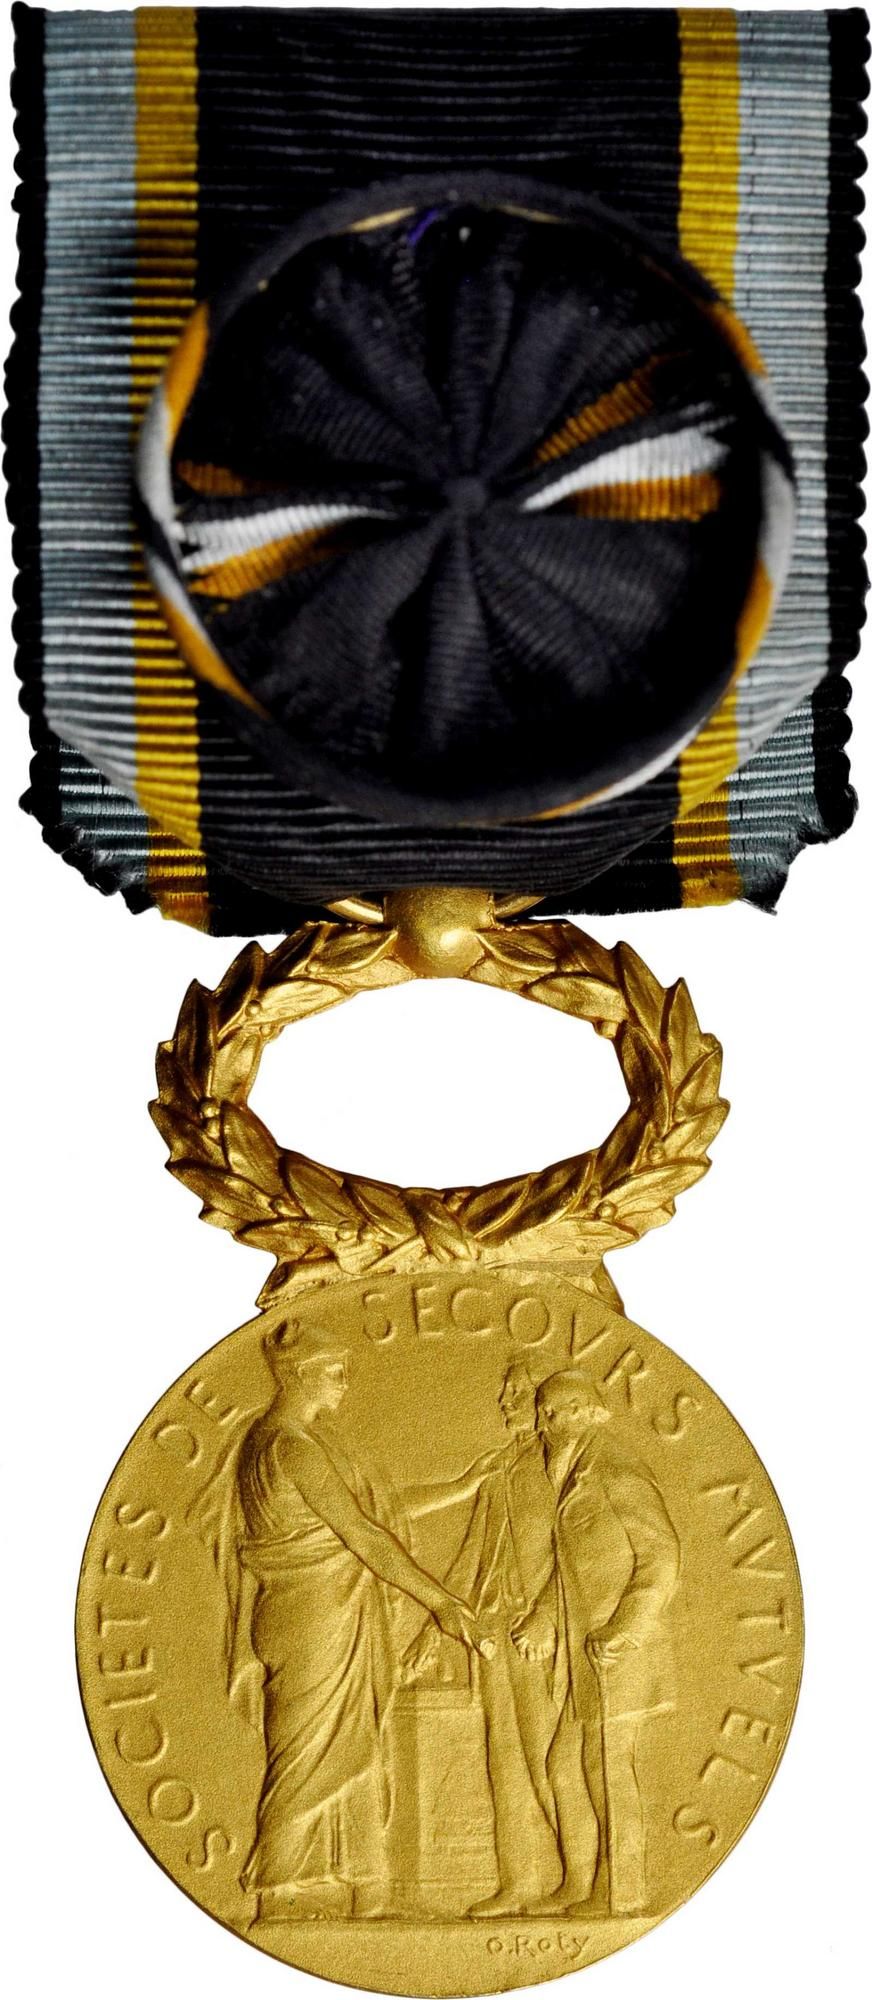 G056 FRANCE. Medal for Mutual Aid Gold Medal, July 1911. Paris M